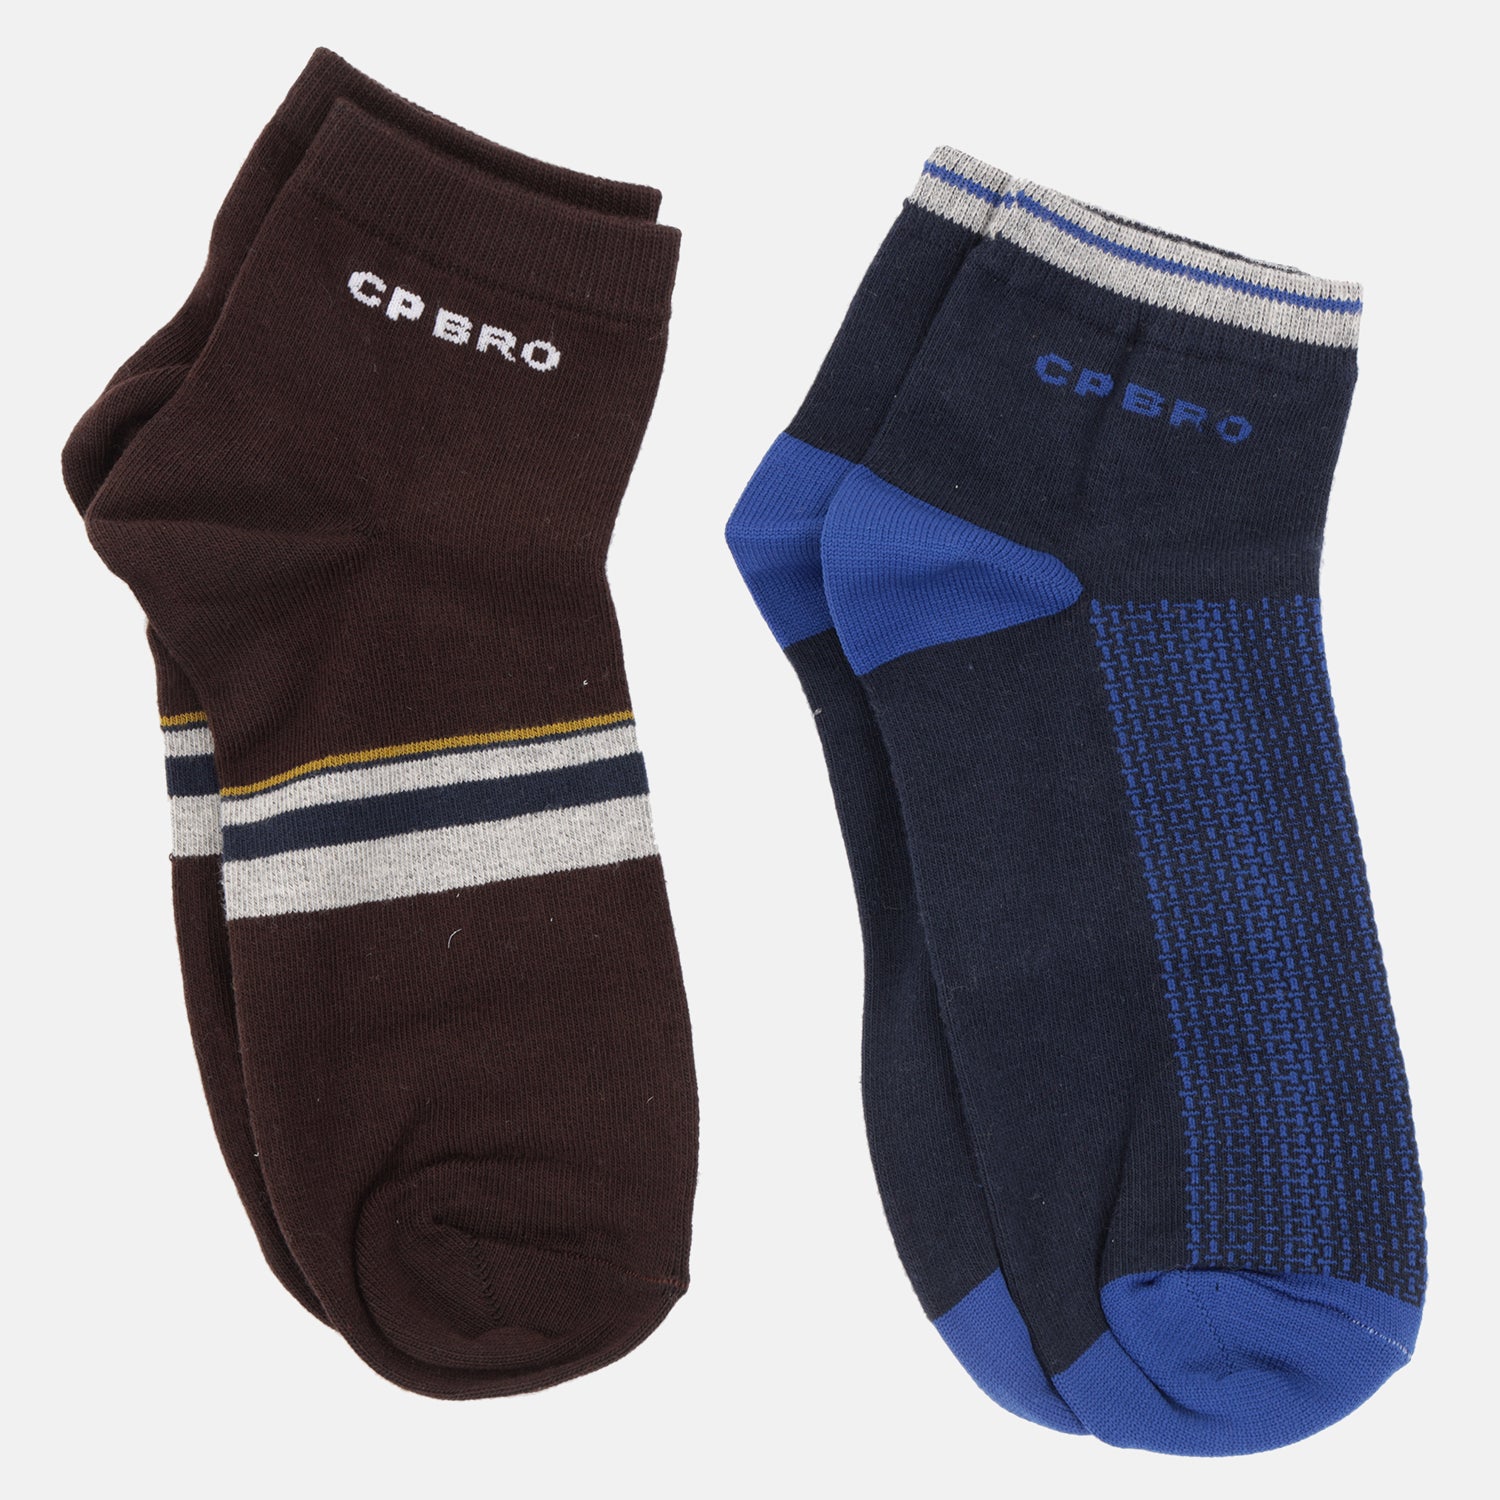 CP BRO Men's Cotton Ankle Socks - Pack of 2 - Brown & Blue | B-SKS-A-BRWBLU